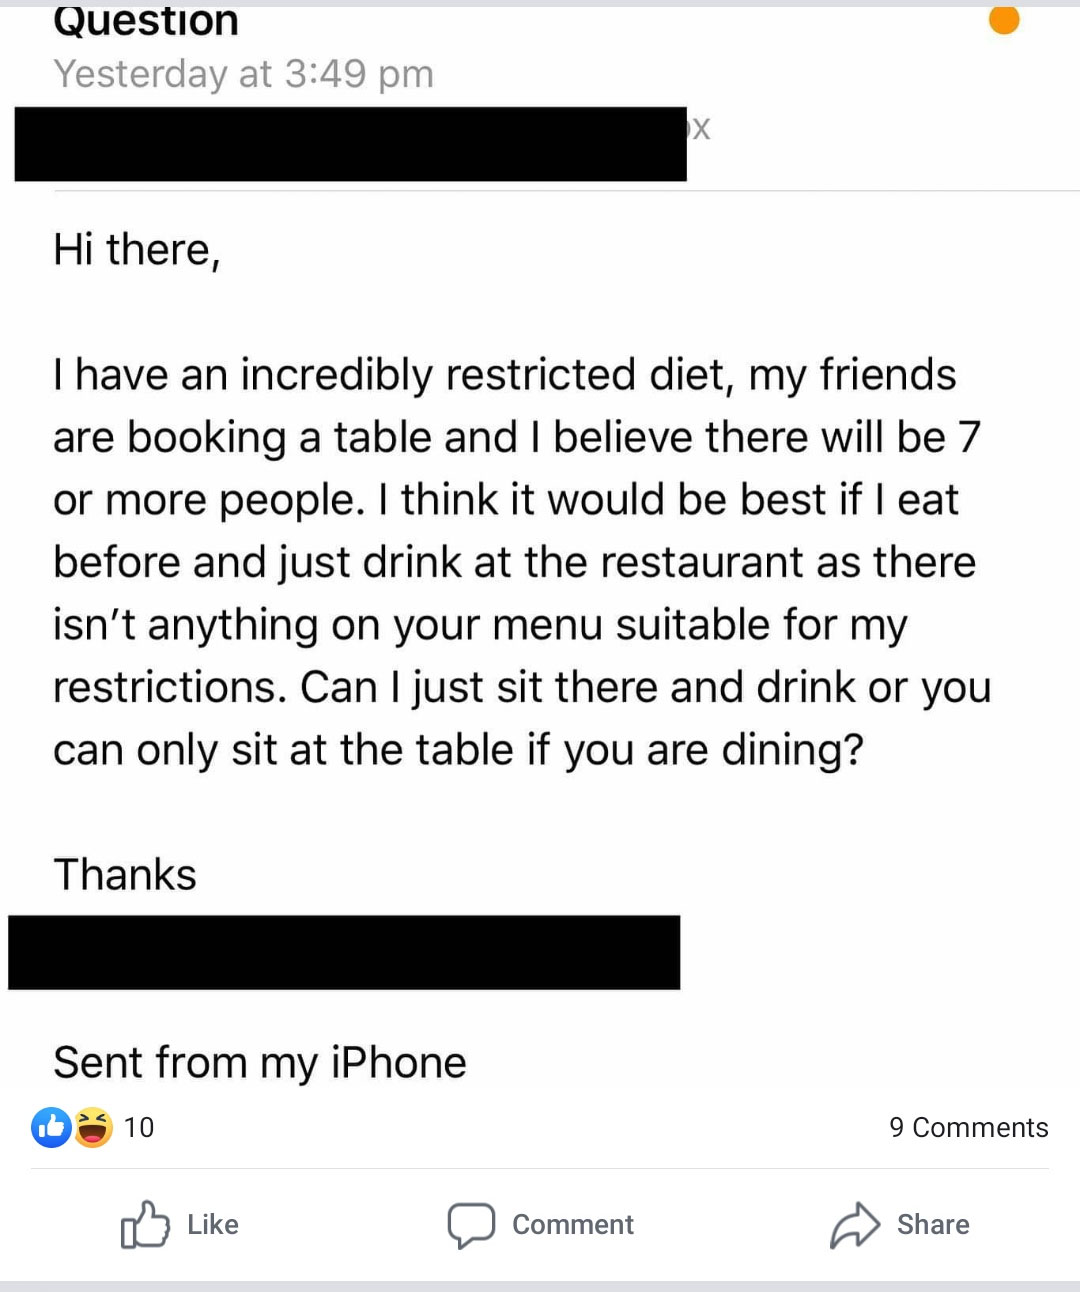 entitled begger - Question Yesterday at Hi there, I have an incredibly restricted diet, my friends are booking a table and I believe there will be 7 or more people. I think it would be best if I eat before and just drink at the restaurant as there isn't a